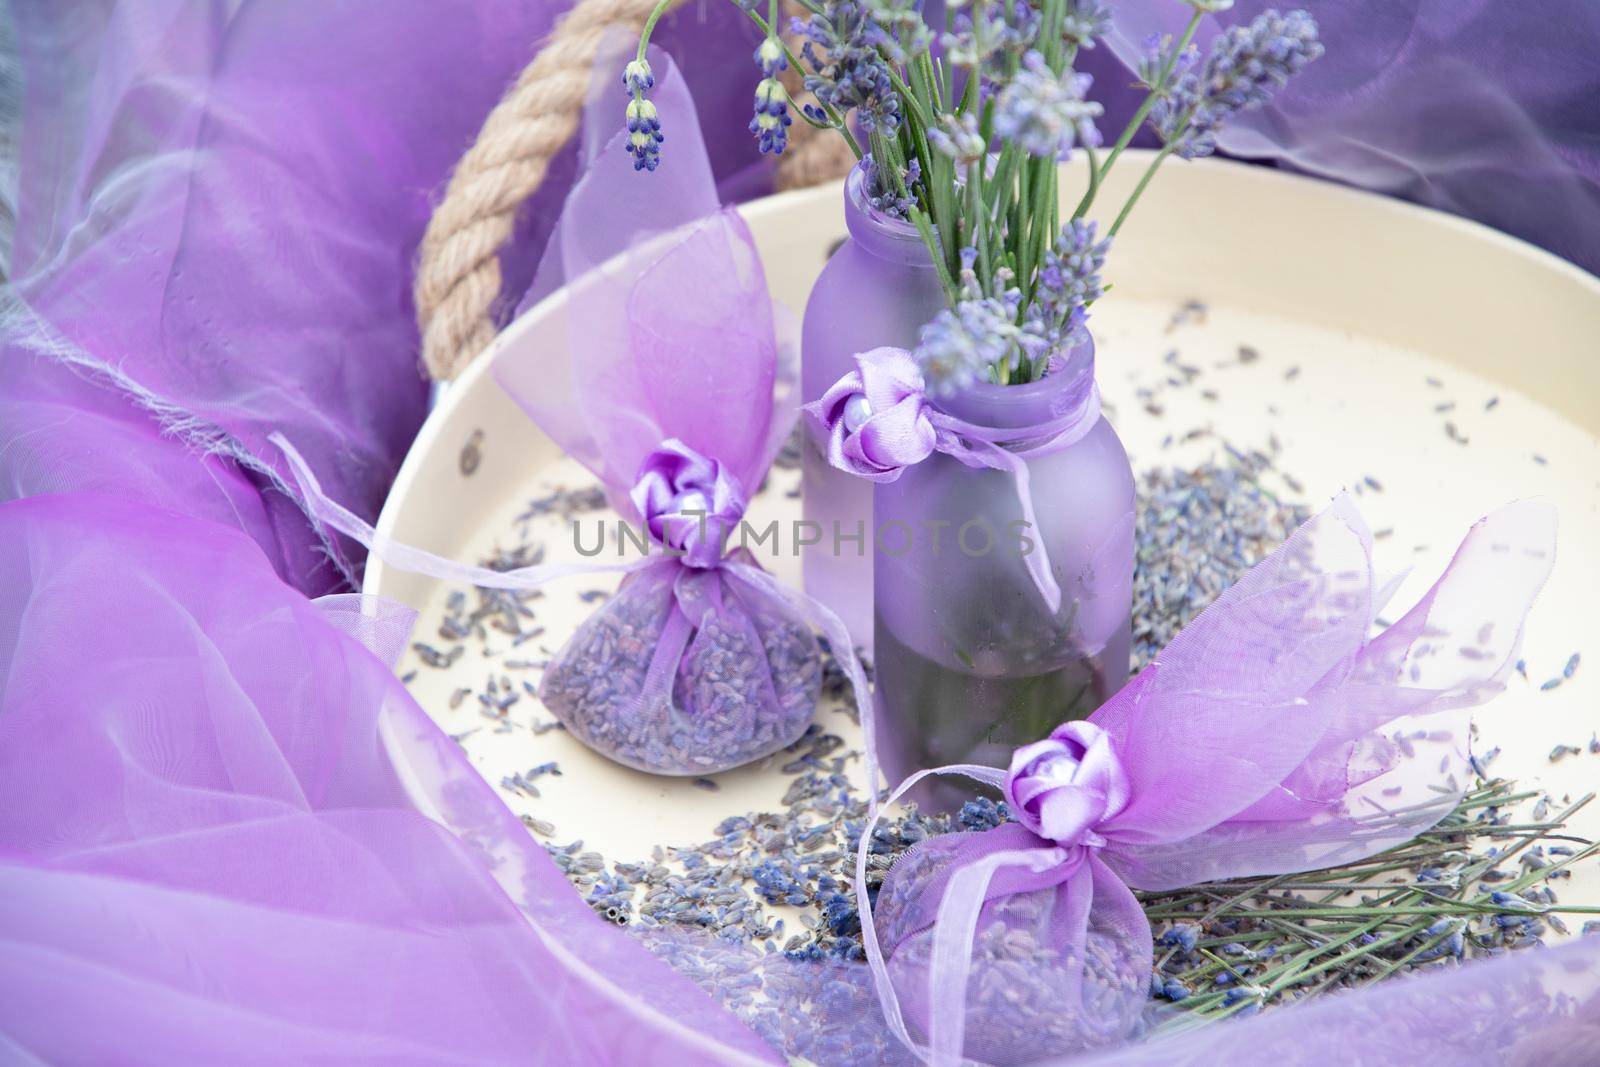 Lilac lavender in vases and lavender sachets in chiffon bags on a tray with dry flowers, aromatherapy, purple background, floral still life. High quality photo